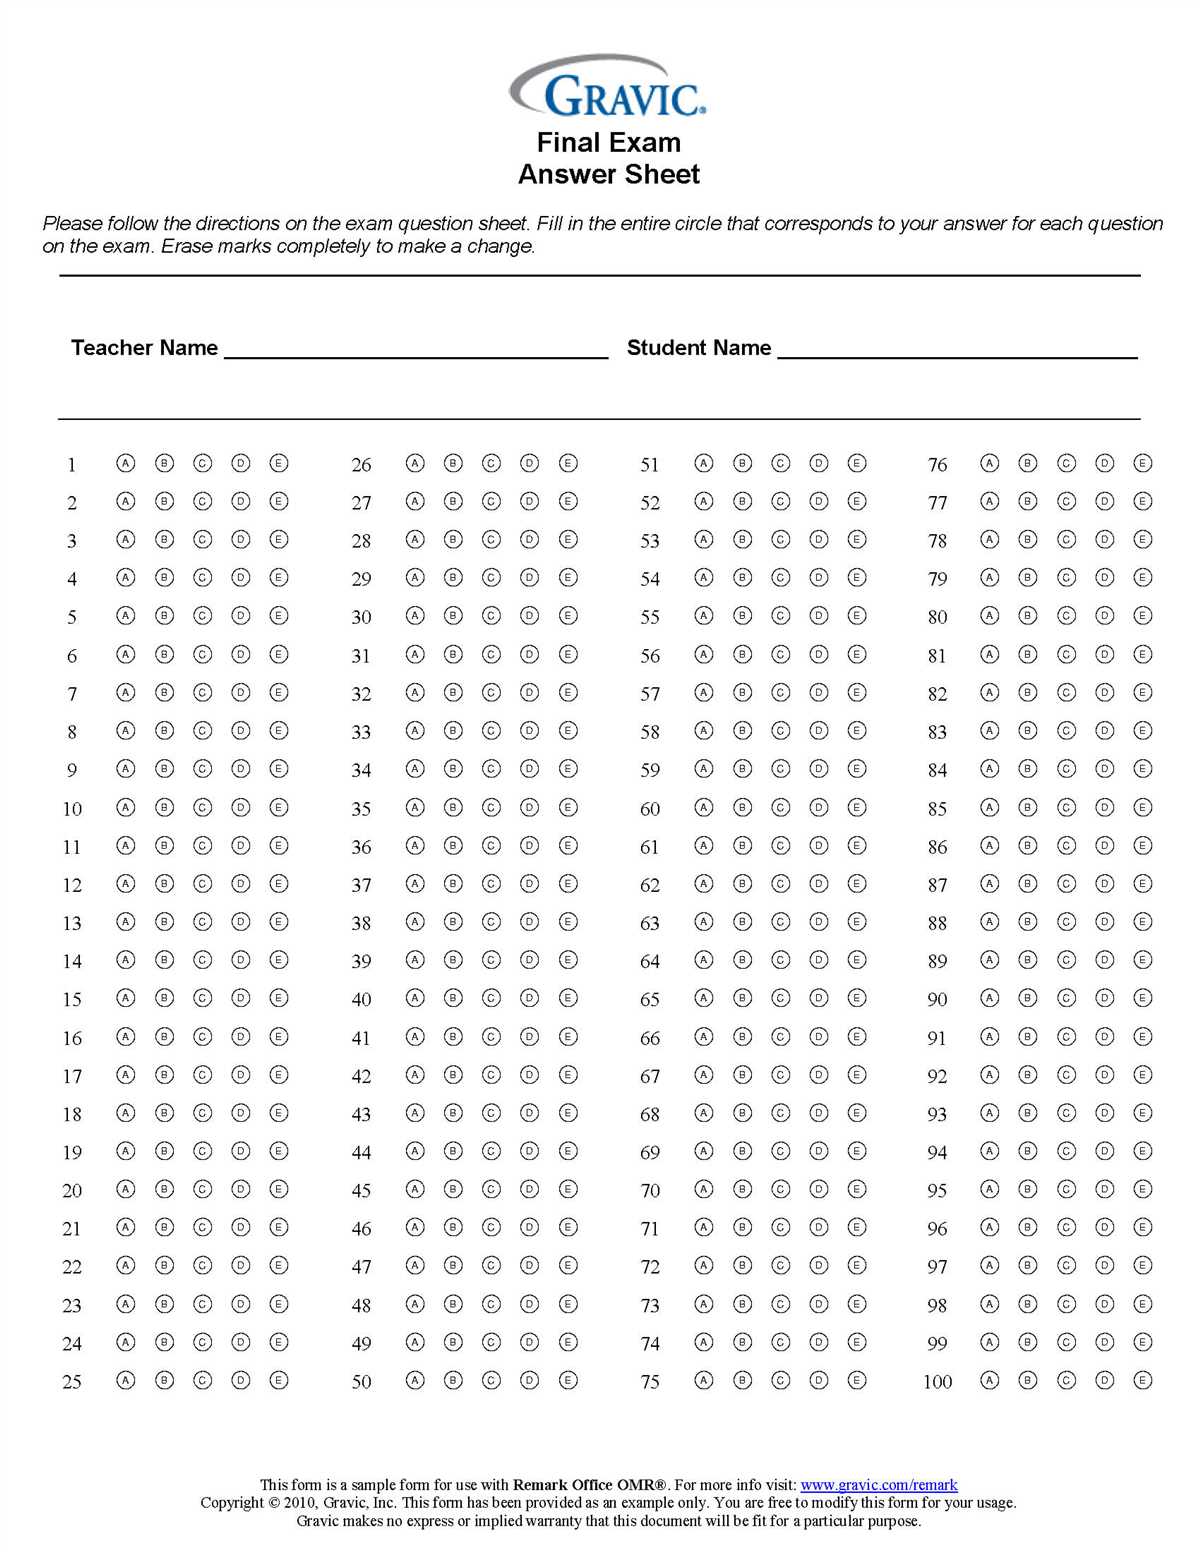 How Does a Multiple Choice Answer Sheet Generator Work?